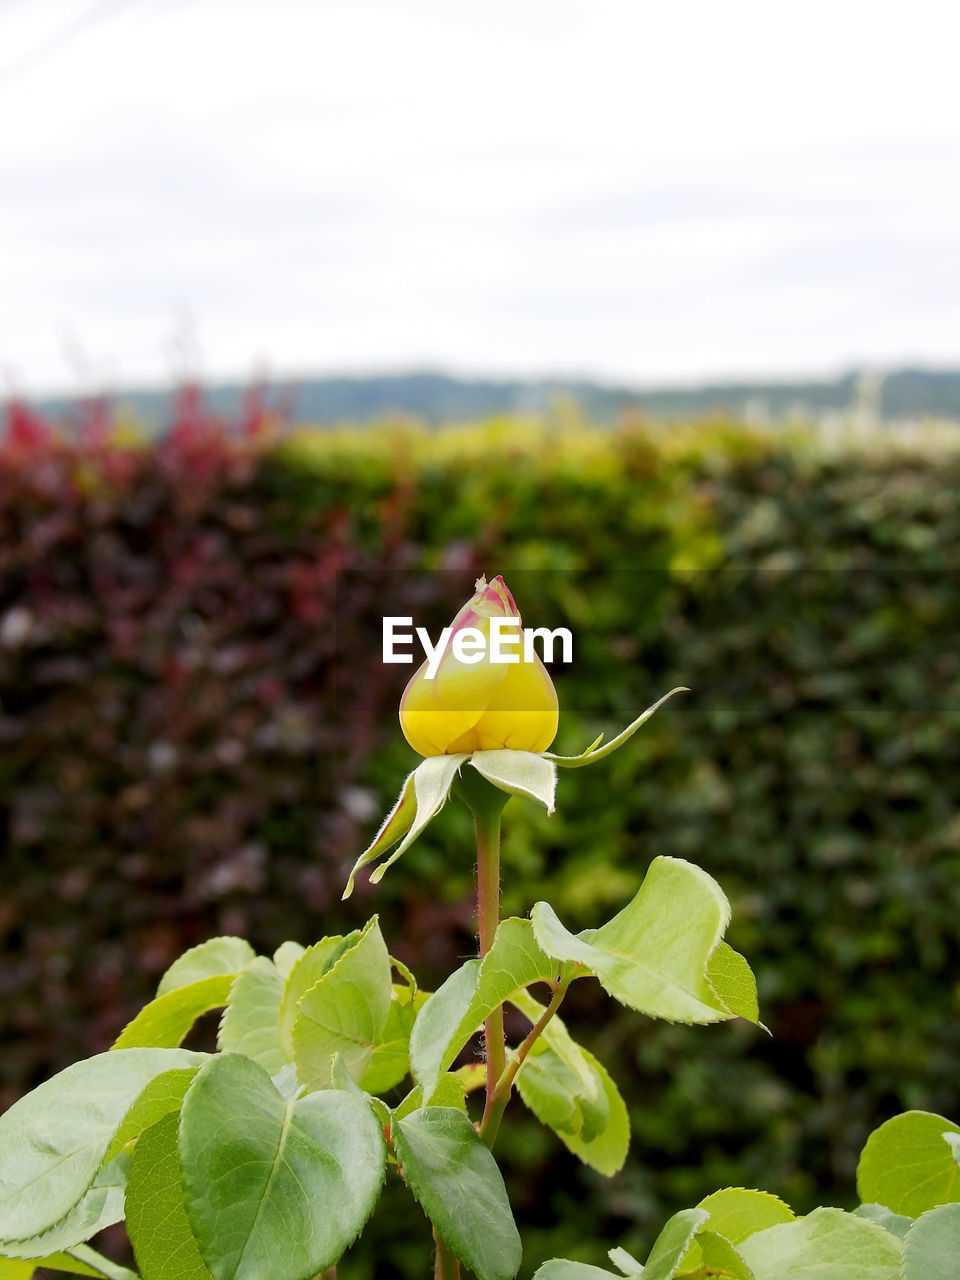 plant, flower, nature, growth, flowering plant, beauty in nature, leaf, plant part, yellow, freshness, focus on foreground, close-up, no people, green, outdoors, day, fragility, sky, flower head, petal, landscape, environment, agriculture, food, wildflower, springtime, inflorescence, land, botany, field